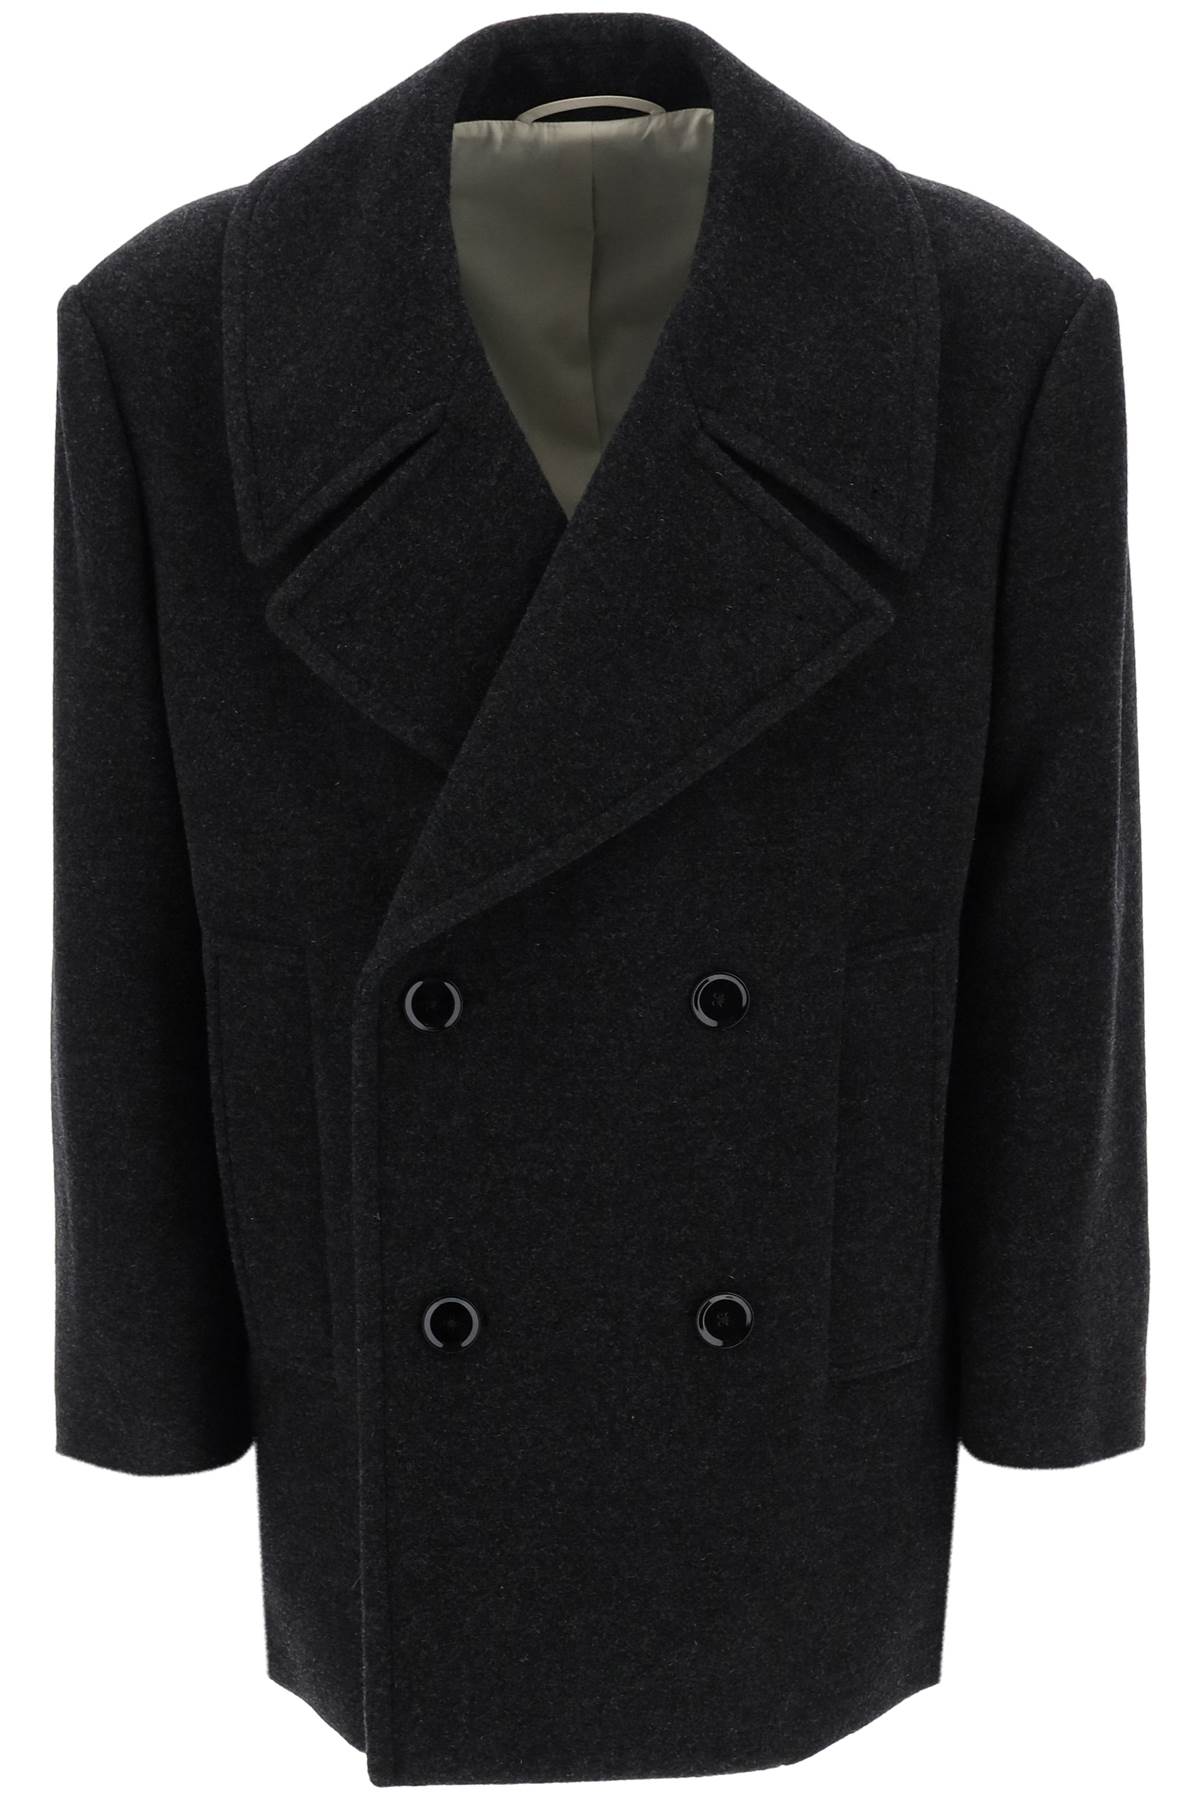 LEMAIRE DOUBLE-BREASTED MIDI PEACOAT